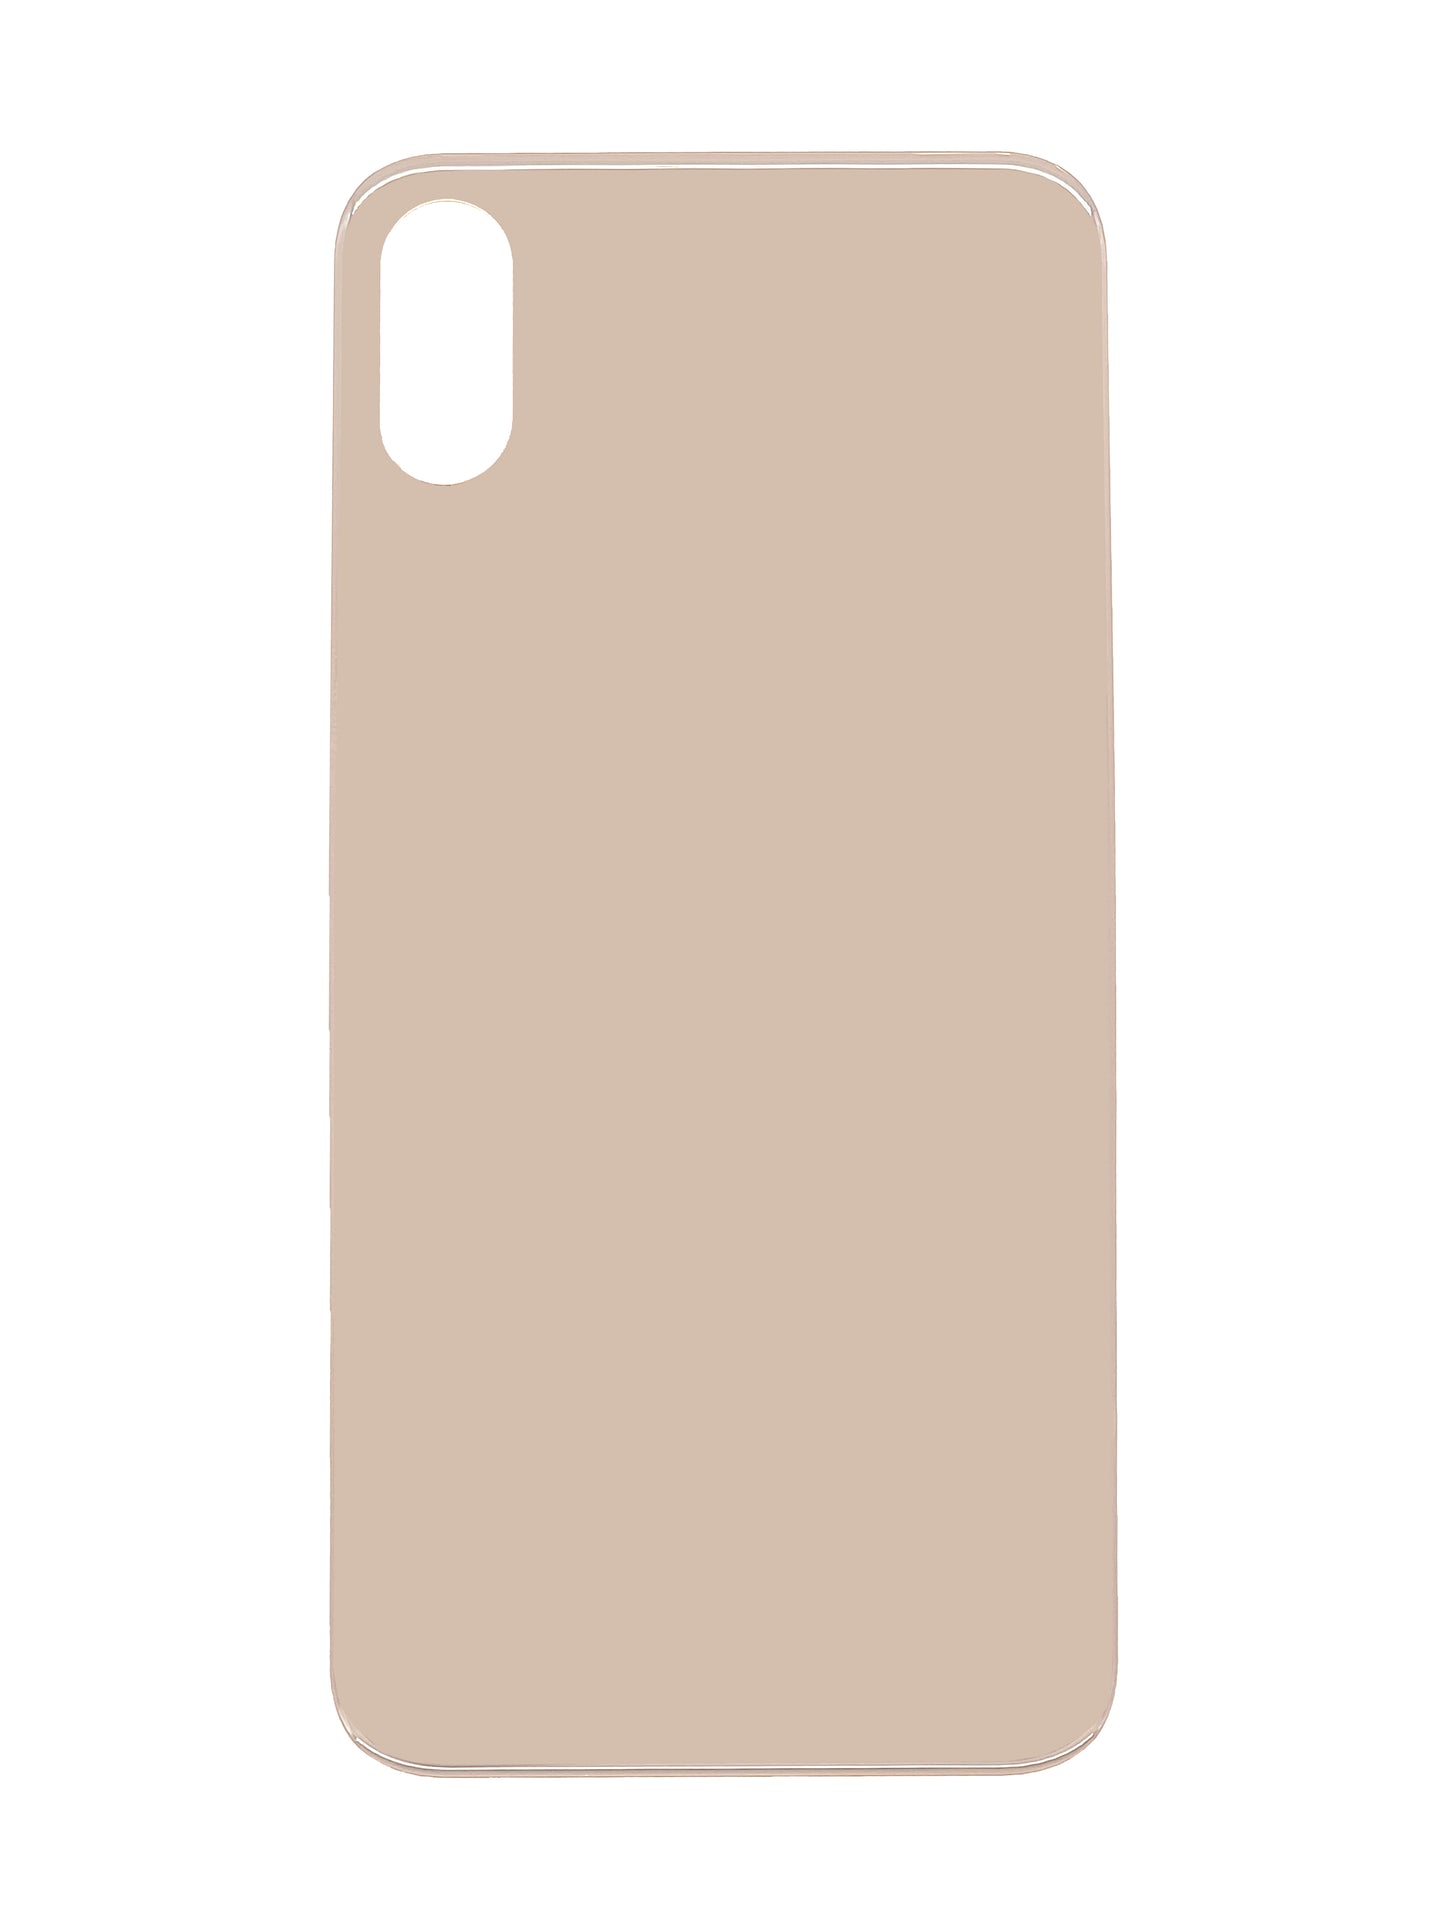 iPhone X Back Glass (No Logo) (Gold)